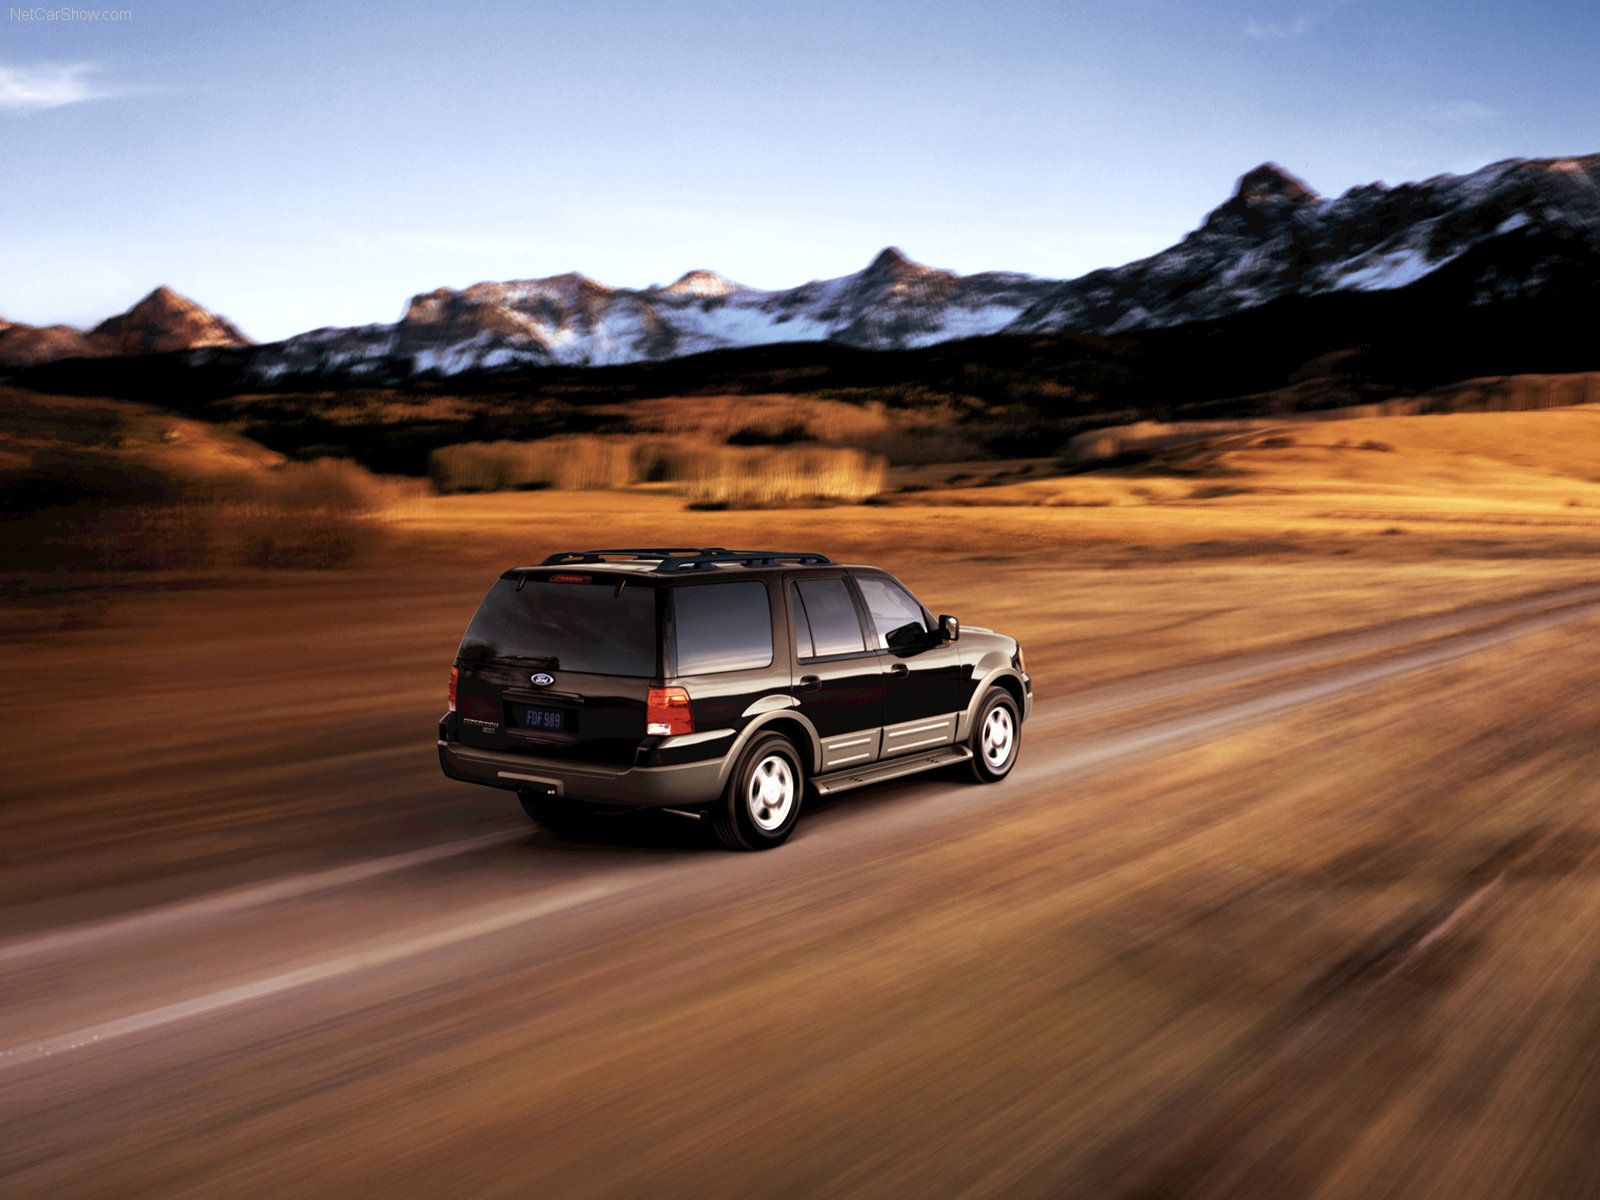 Ford Expedition picture. Ford .carsbase.com